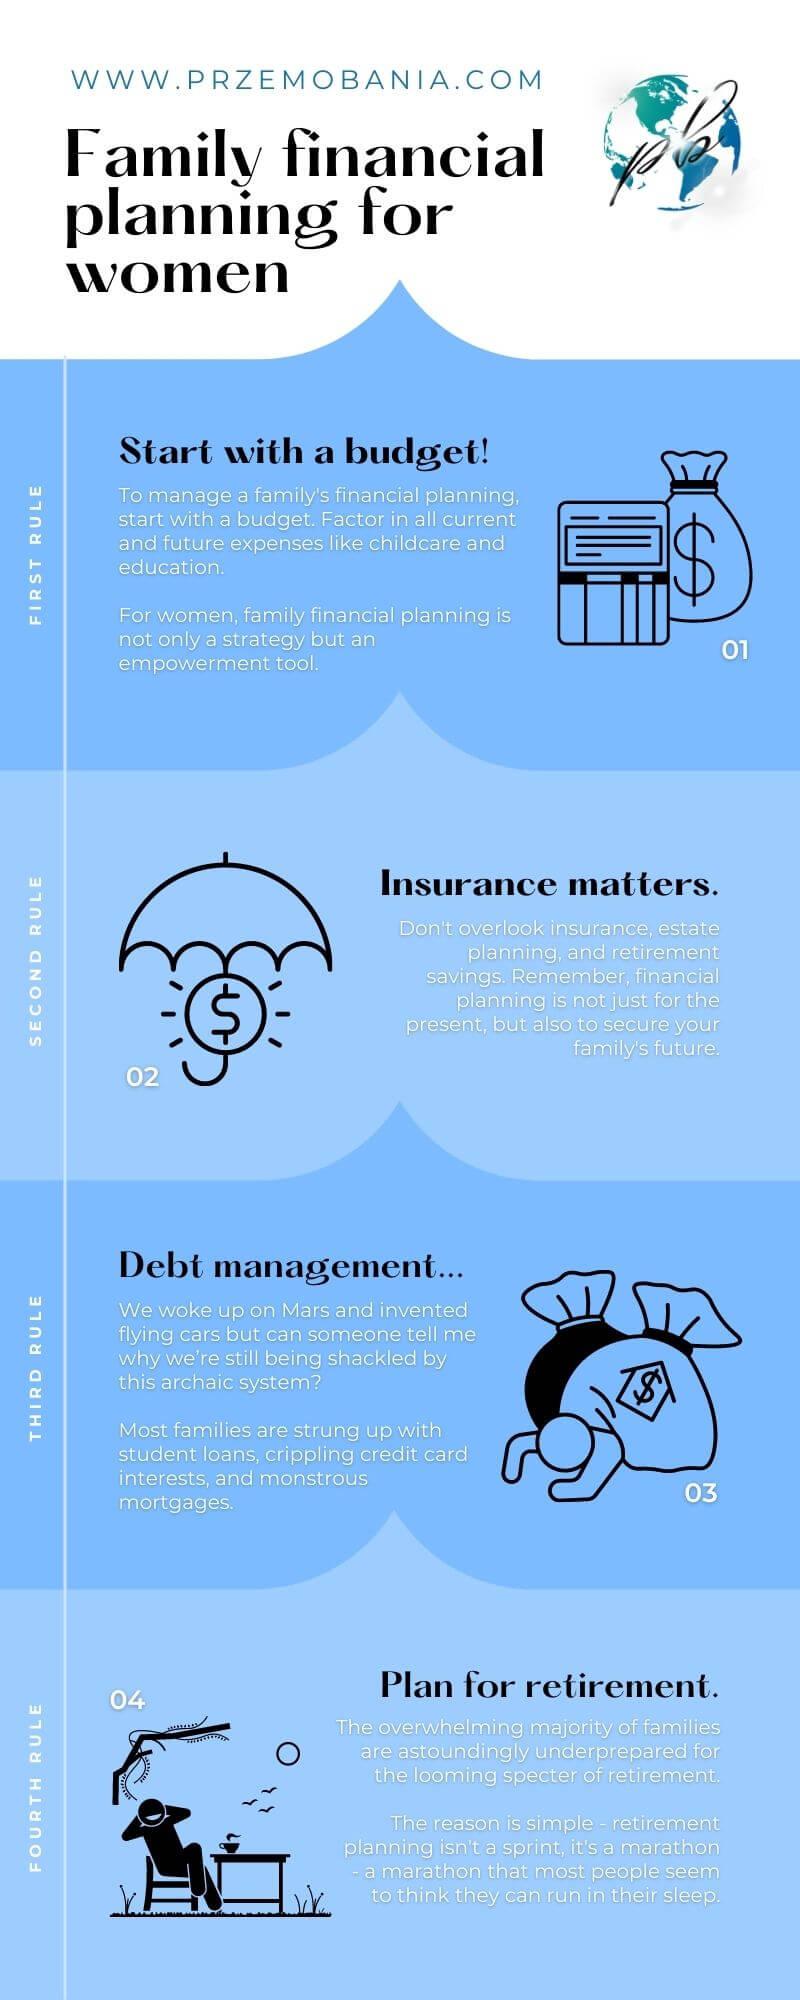 Family financial planning for women infographic